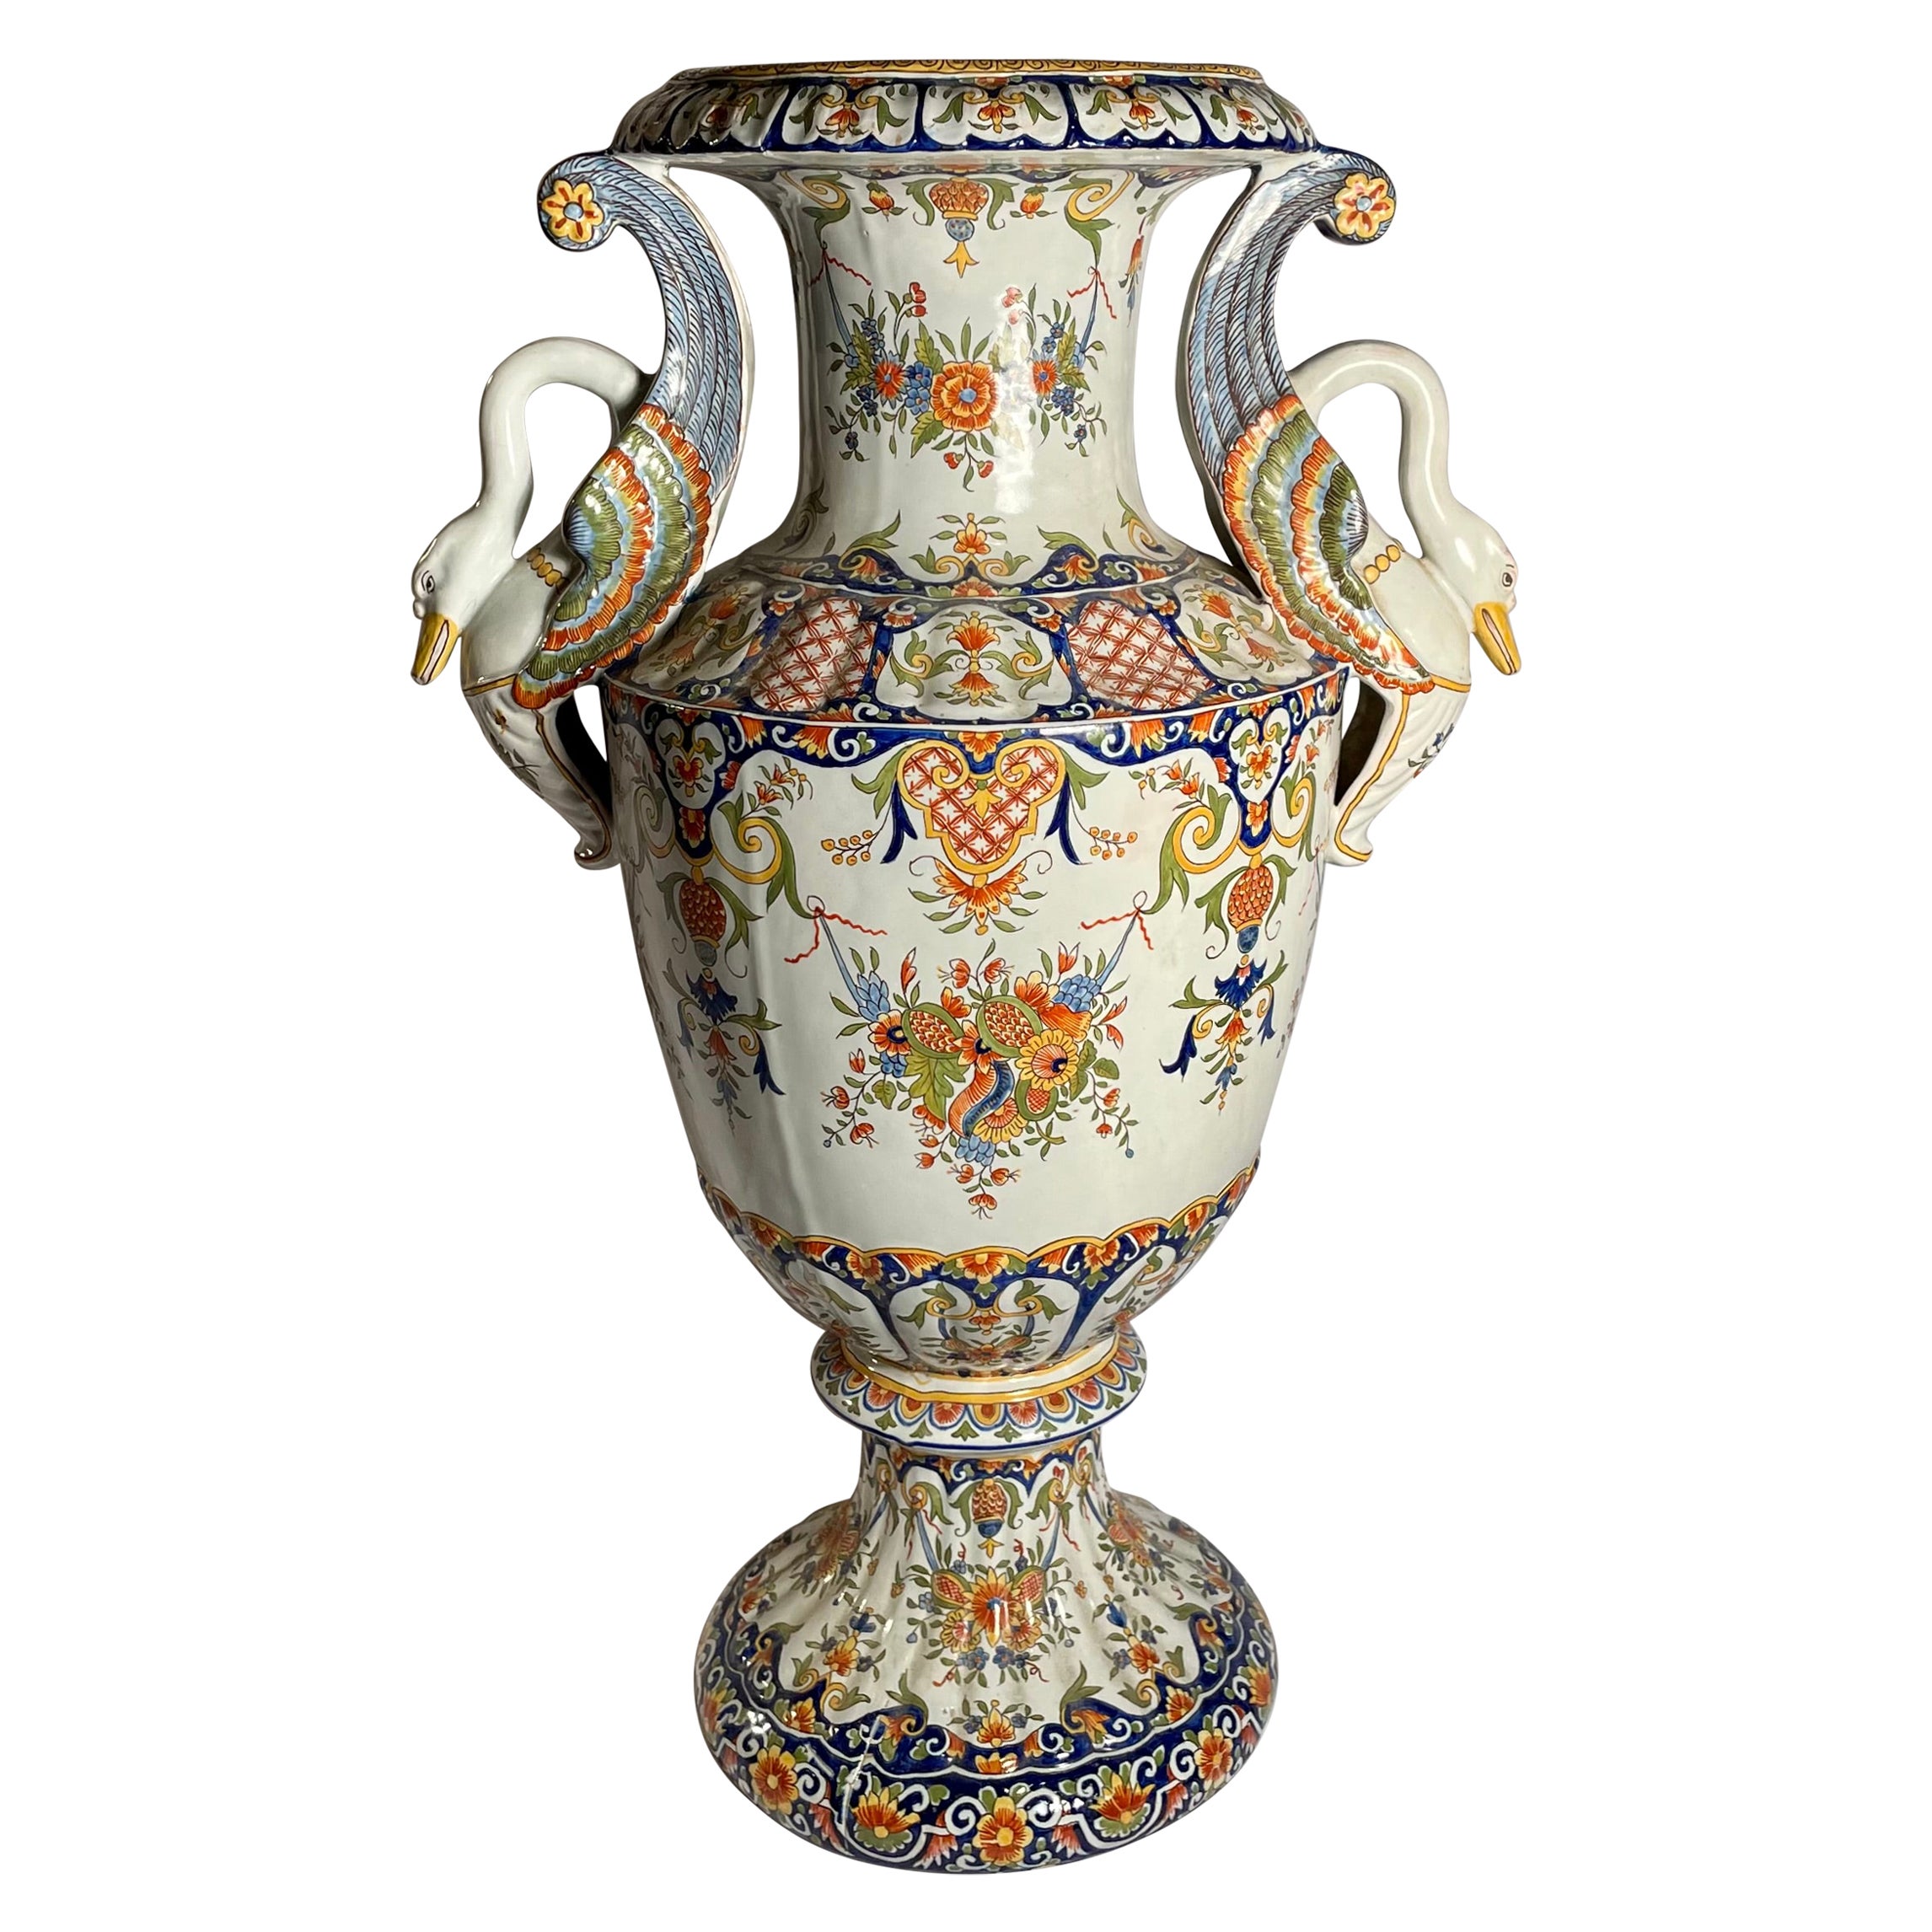 Antique French Faience Enameled Urn, circa 1900-1910